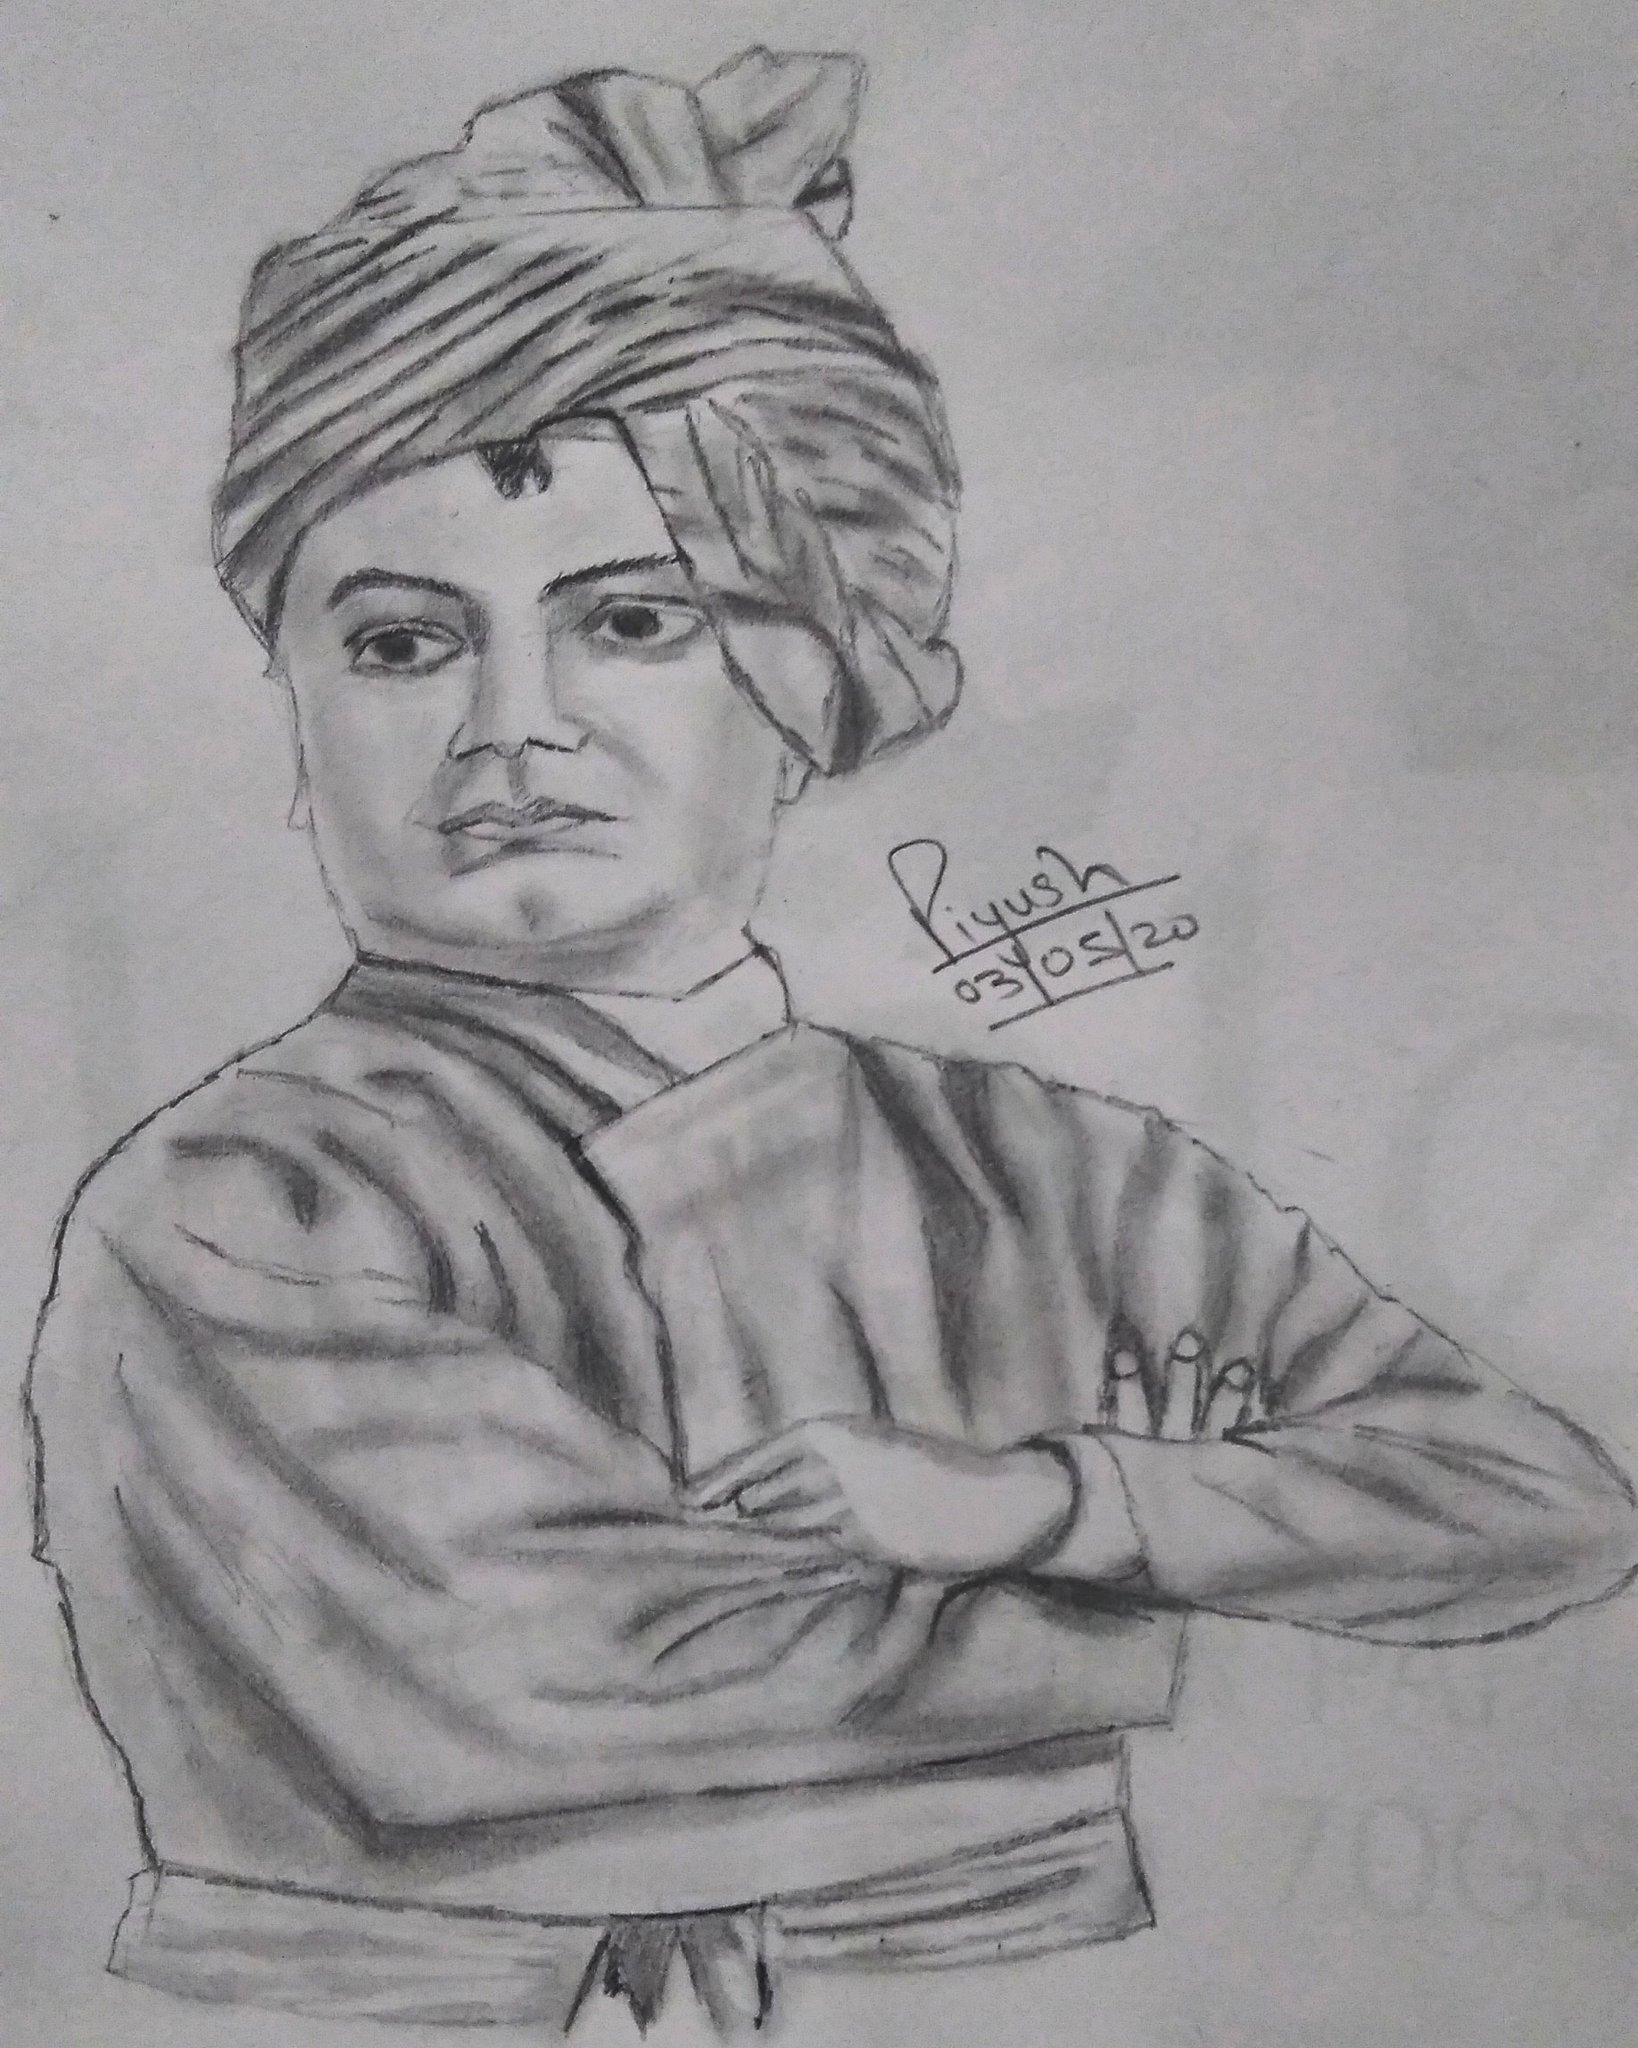 Hariprasad Art  one of my commissiond pencil drawing Swami Vivekananda  Hop u like this If you want drawings or paintings contact me on my  watsupp no9048097917 No Free drawings pls like